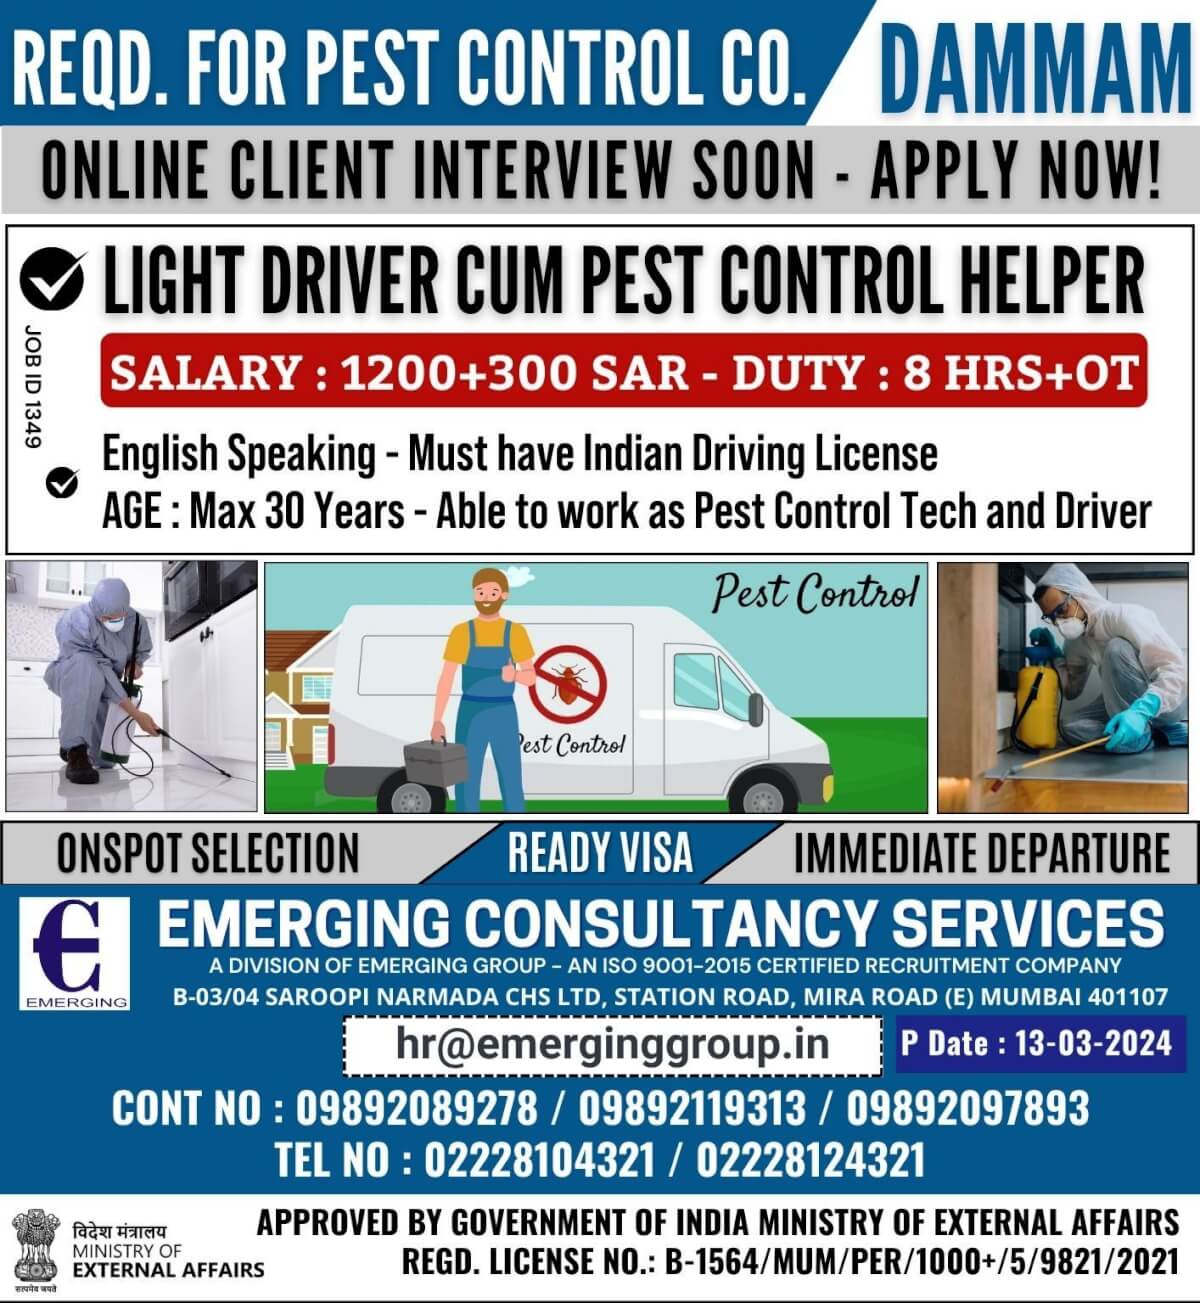 URGENTLY REQUIRED FOR PEST CONTROL COMPANY IN DAMMAM - KSA